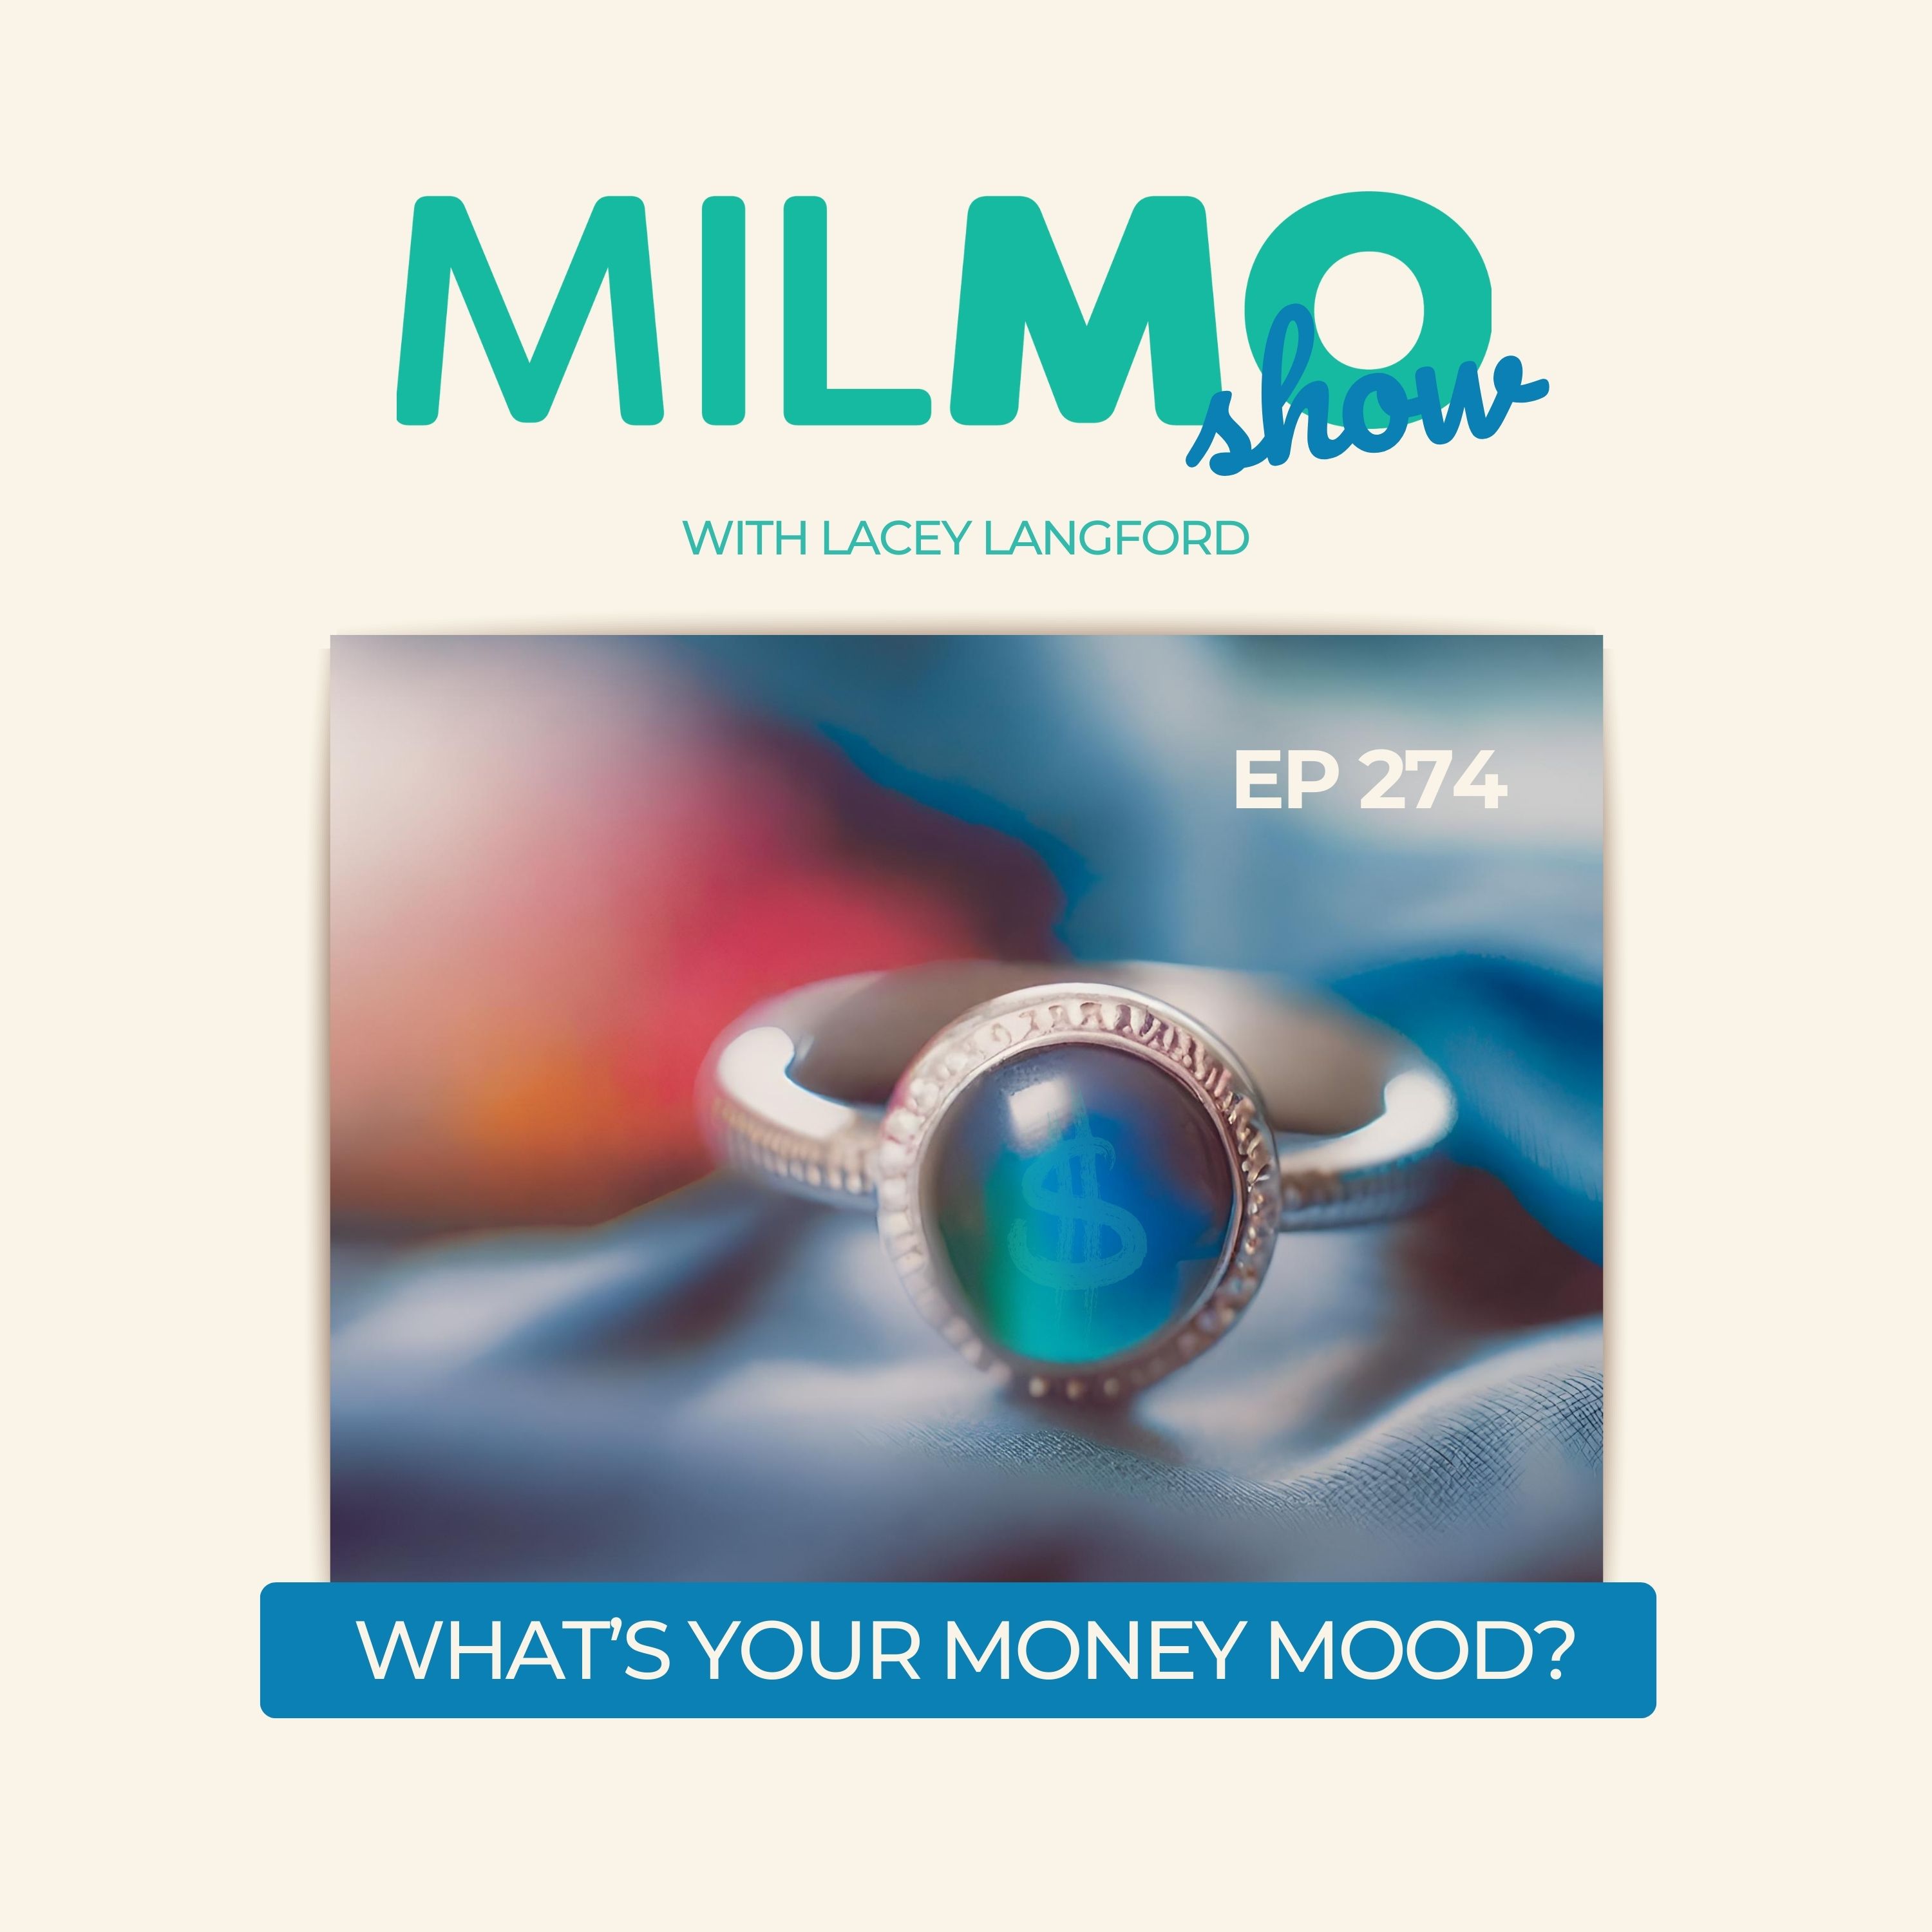 What's your current money mood? Learn about common financial emotions like fear, regret, joy and how to assess your money mood.